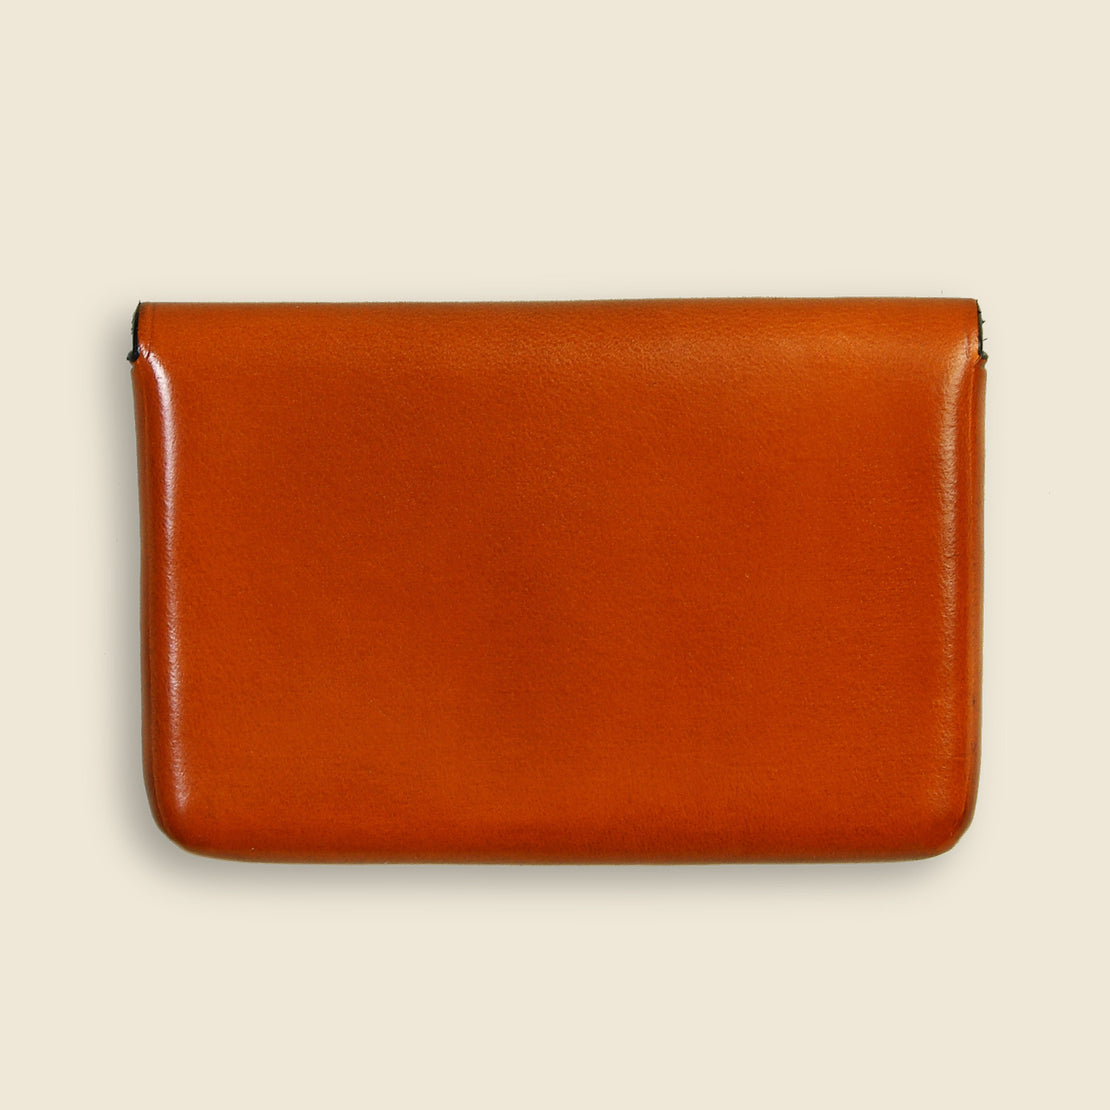 Business Card Holder - Orange - Il Bussetto - STAG Provisions - Accessories - Wallets